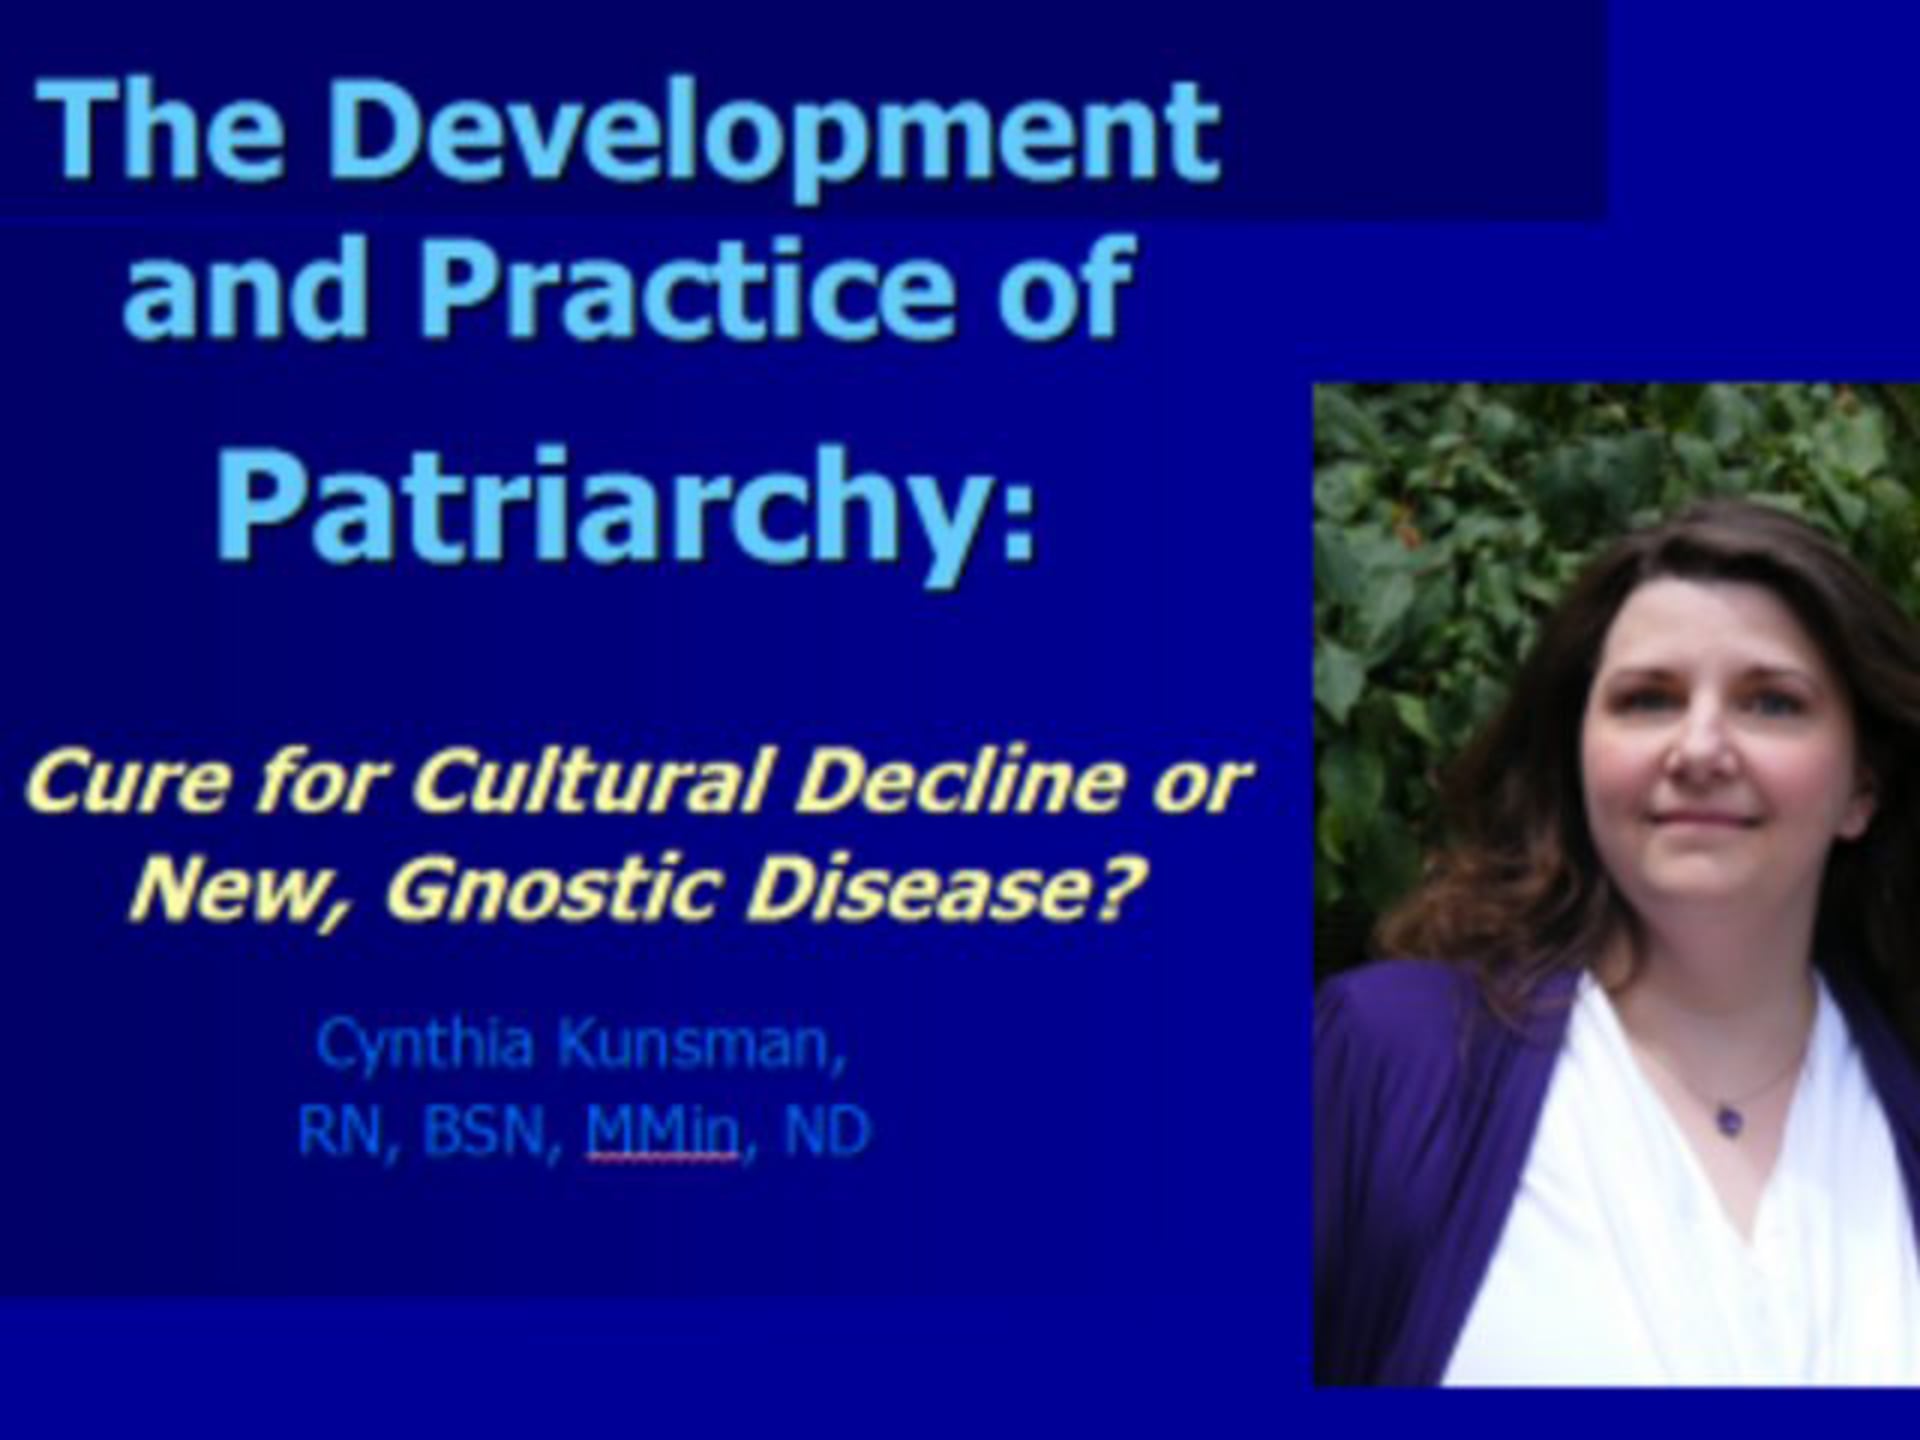 Cynthia Kunsman’s Controvertial “Development and Practice of Patriarchy” Workshop, 2008